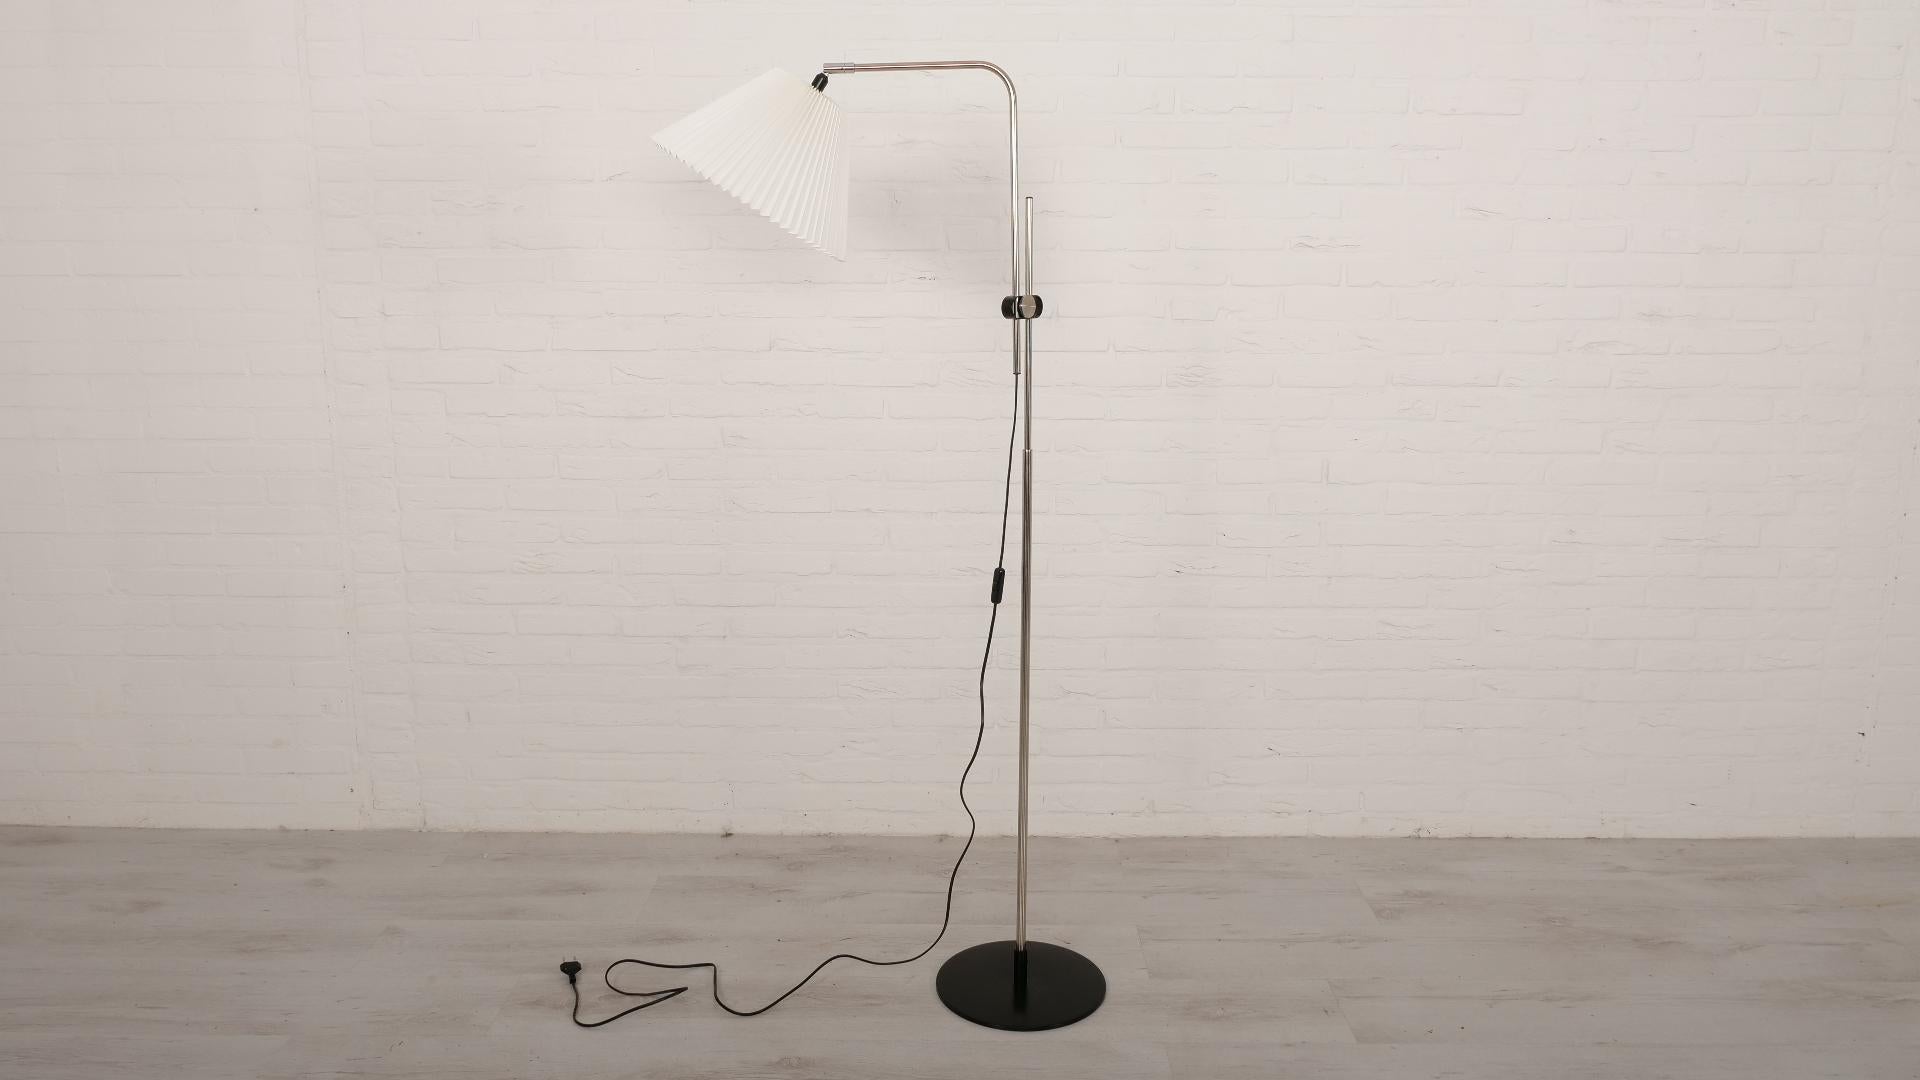 Gorgeous minimalist design floor lamp from Scandinavia! This vintage floor lamp was designed by Michael Bang and produced by Le Klint. This model, model 321, has a beautiful minimalist design with a metal stand, a black base a beautiful white